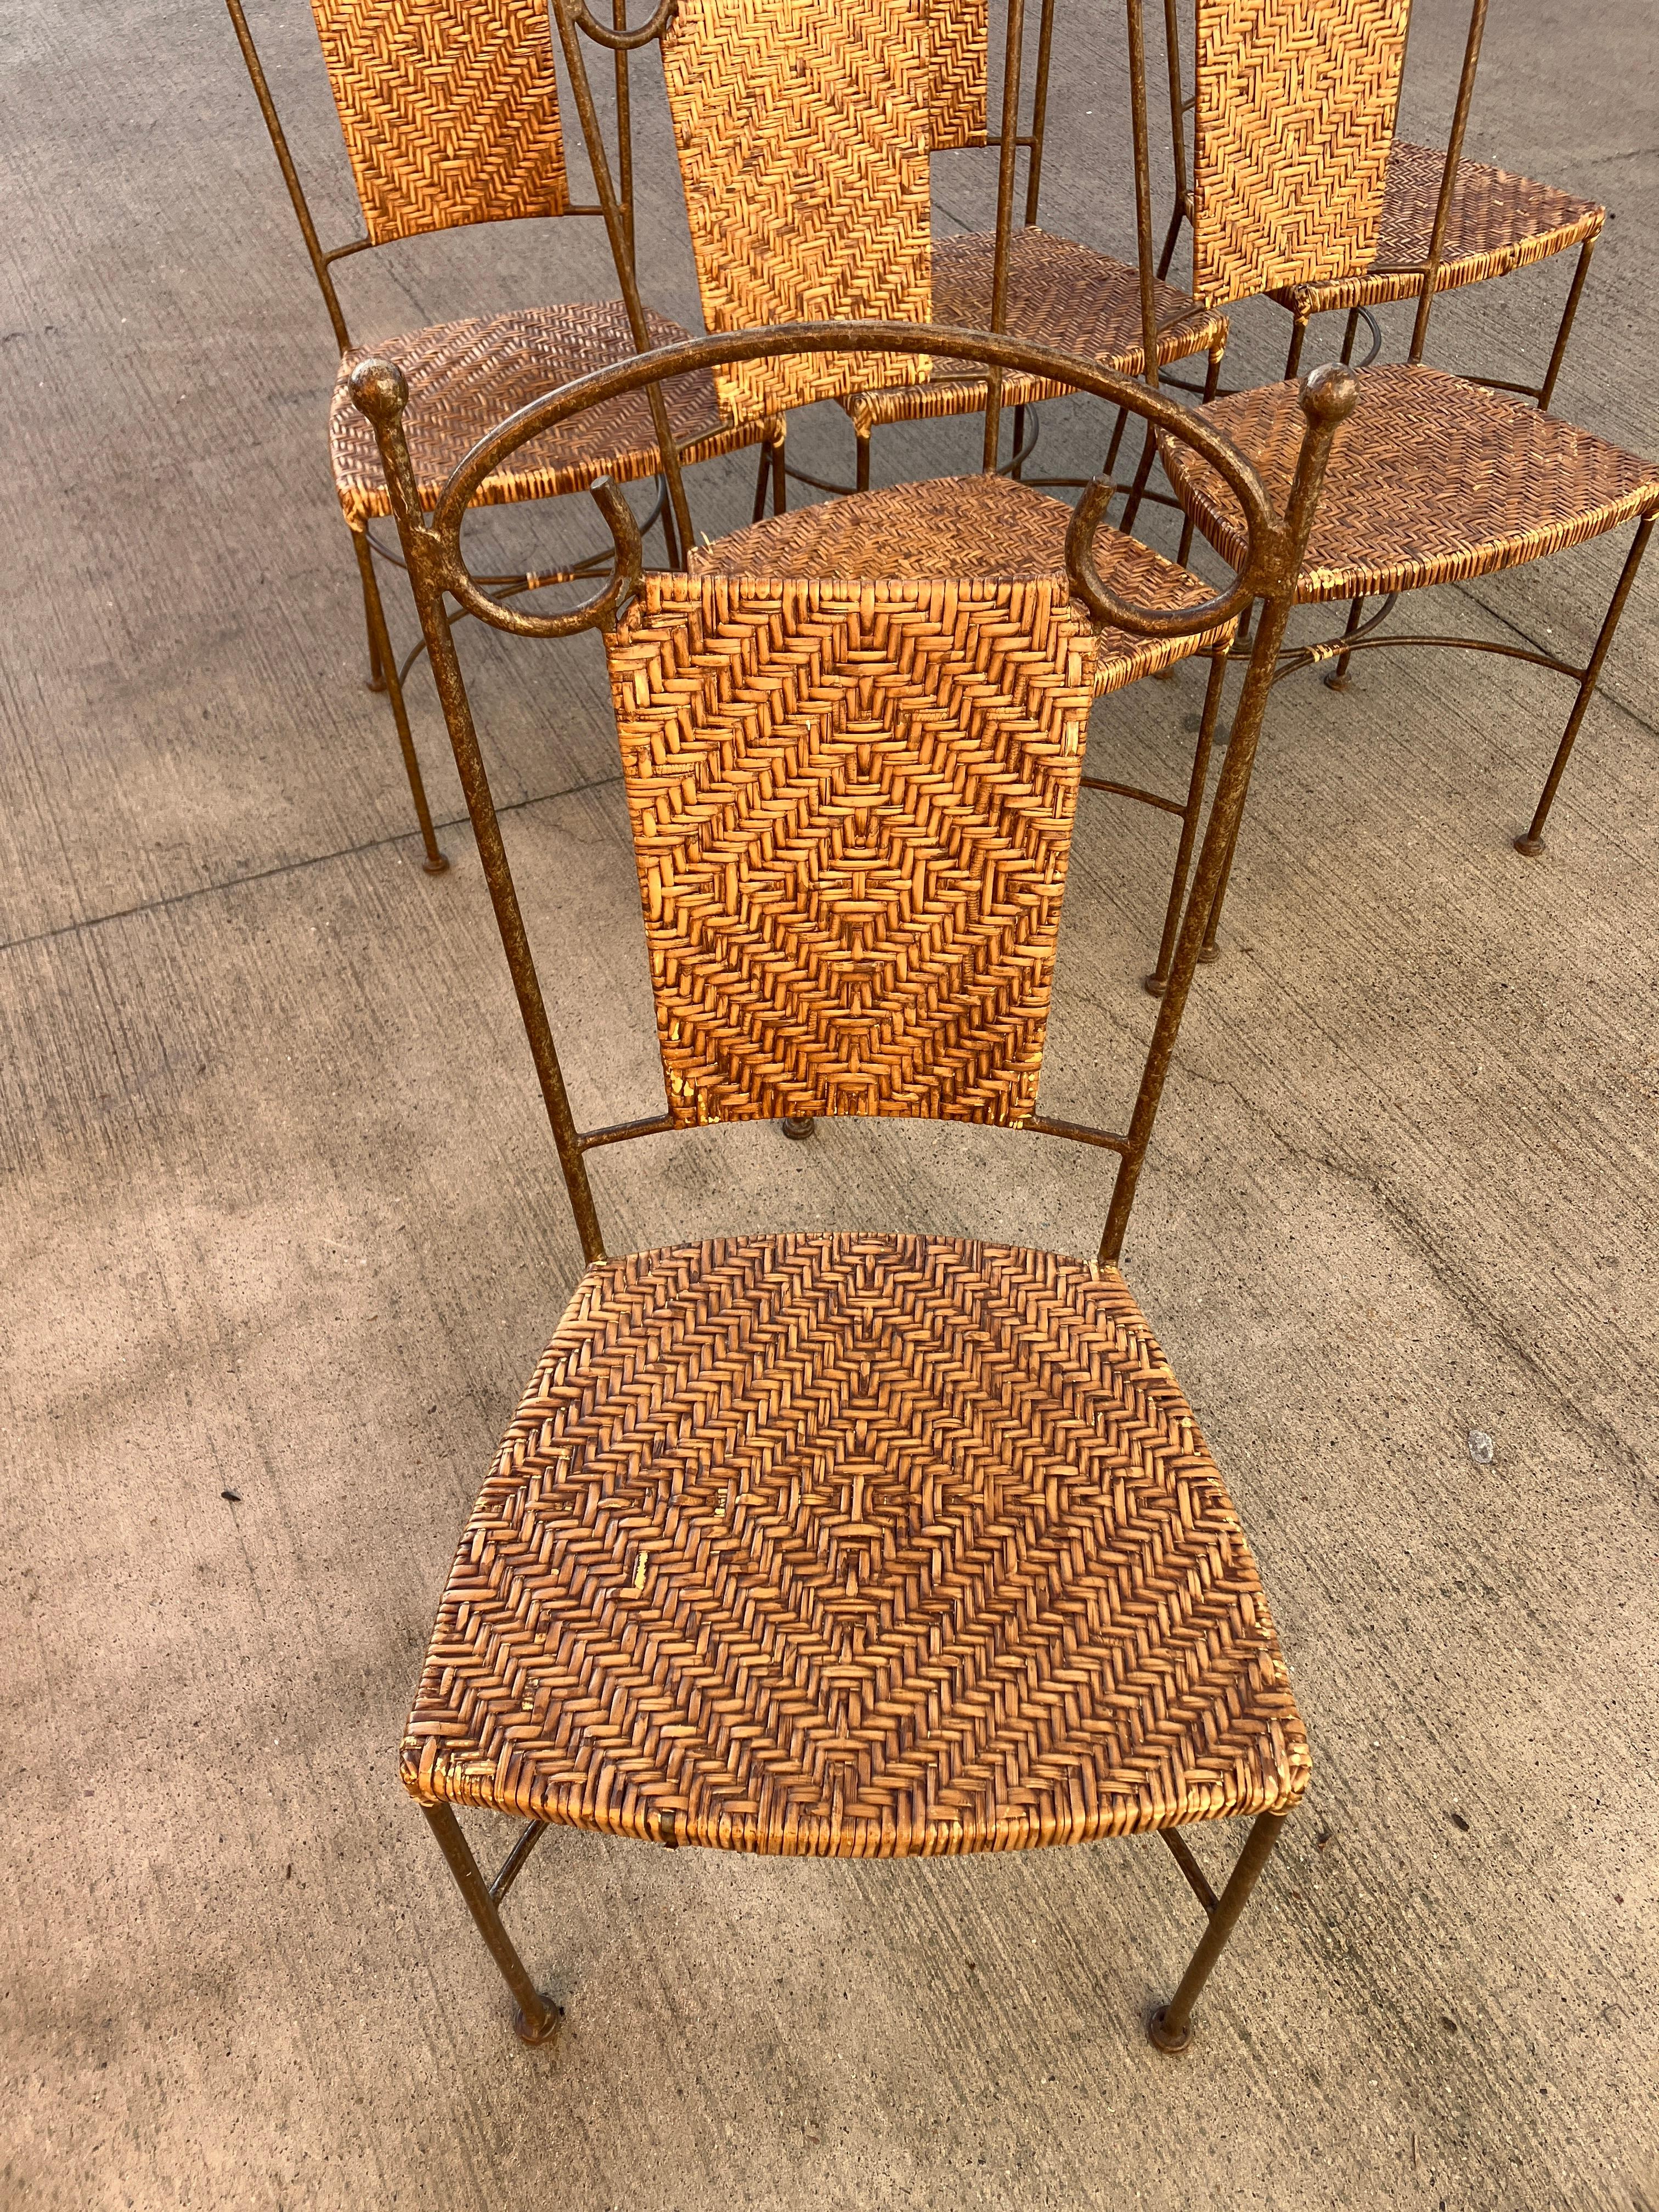 Vintage wrought Iron Dining Chairs with Wicker Seating x 6 For Sale 1